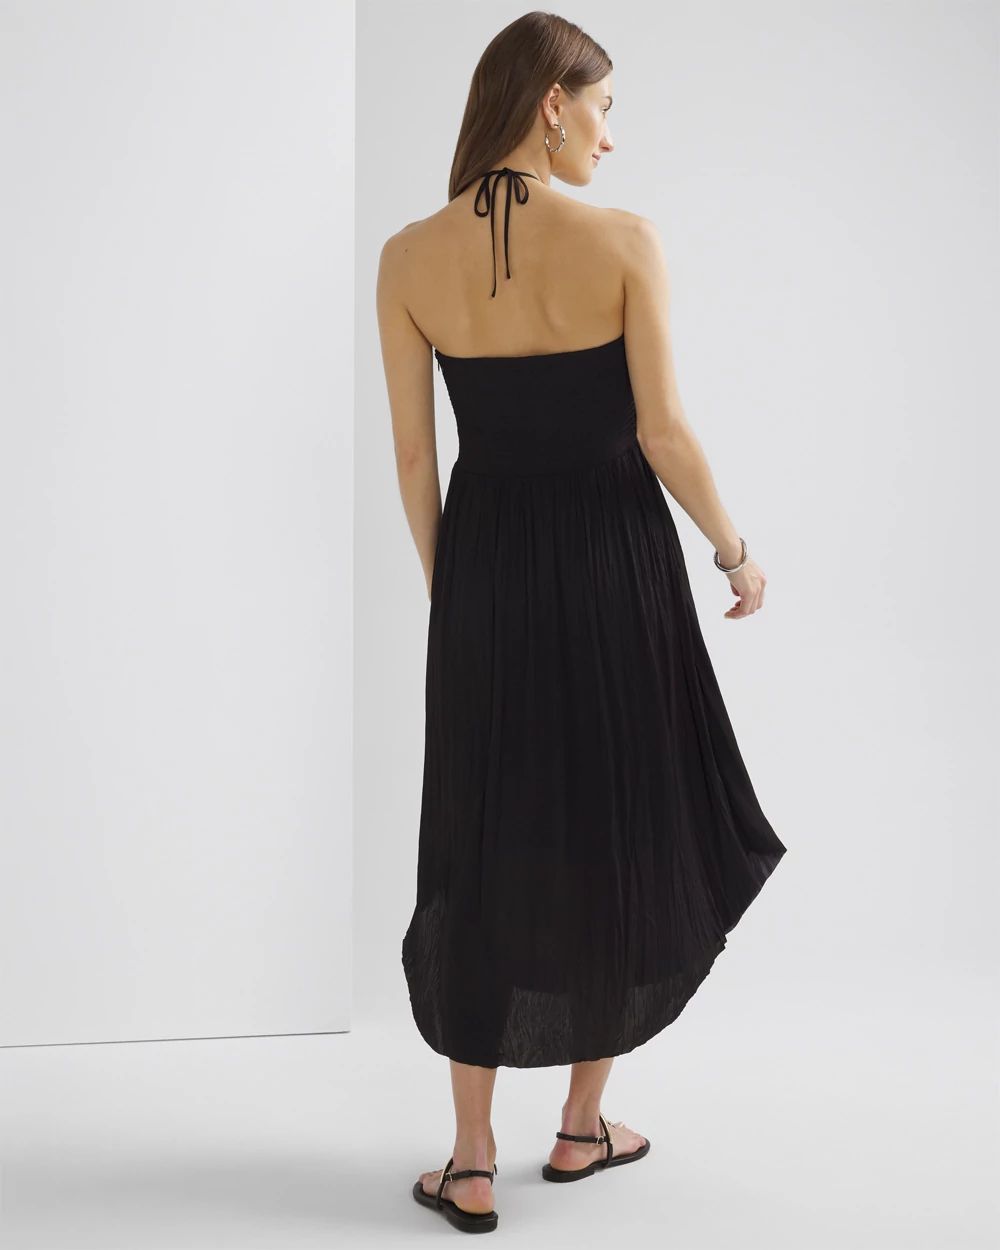 Strapless Pleated Tie-Waist Dress click to view larger image.